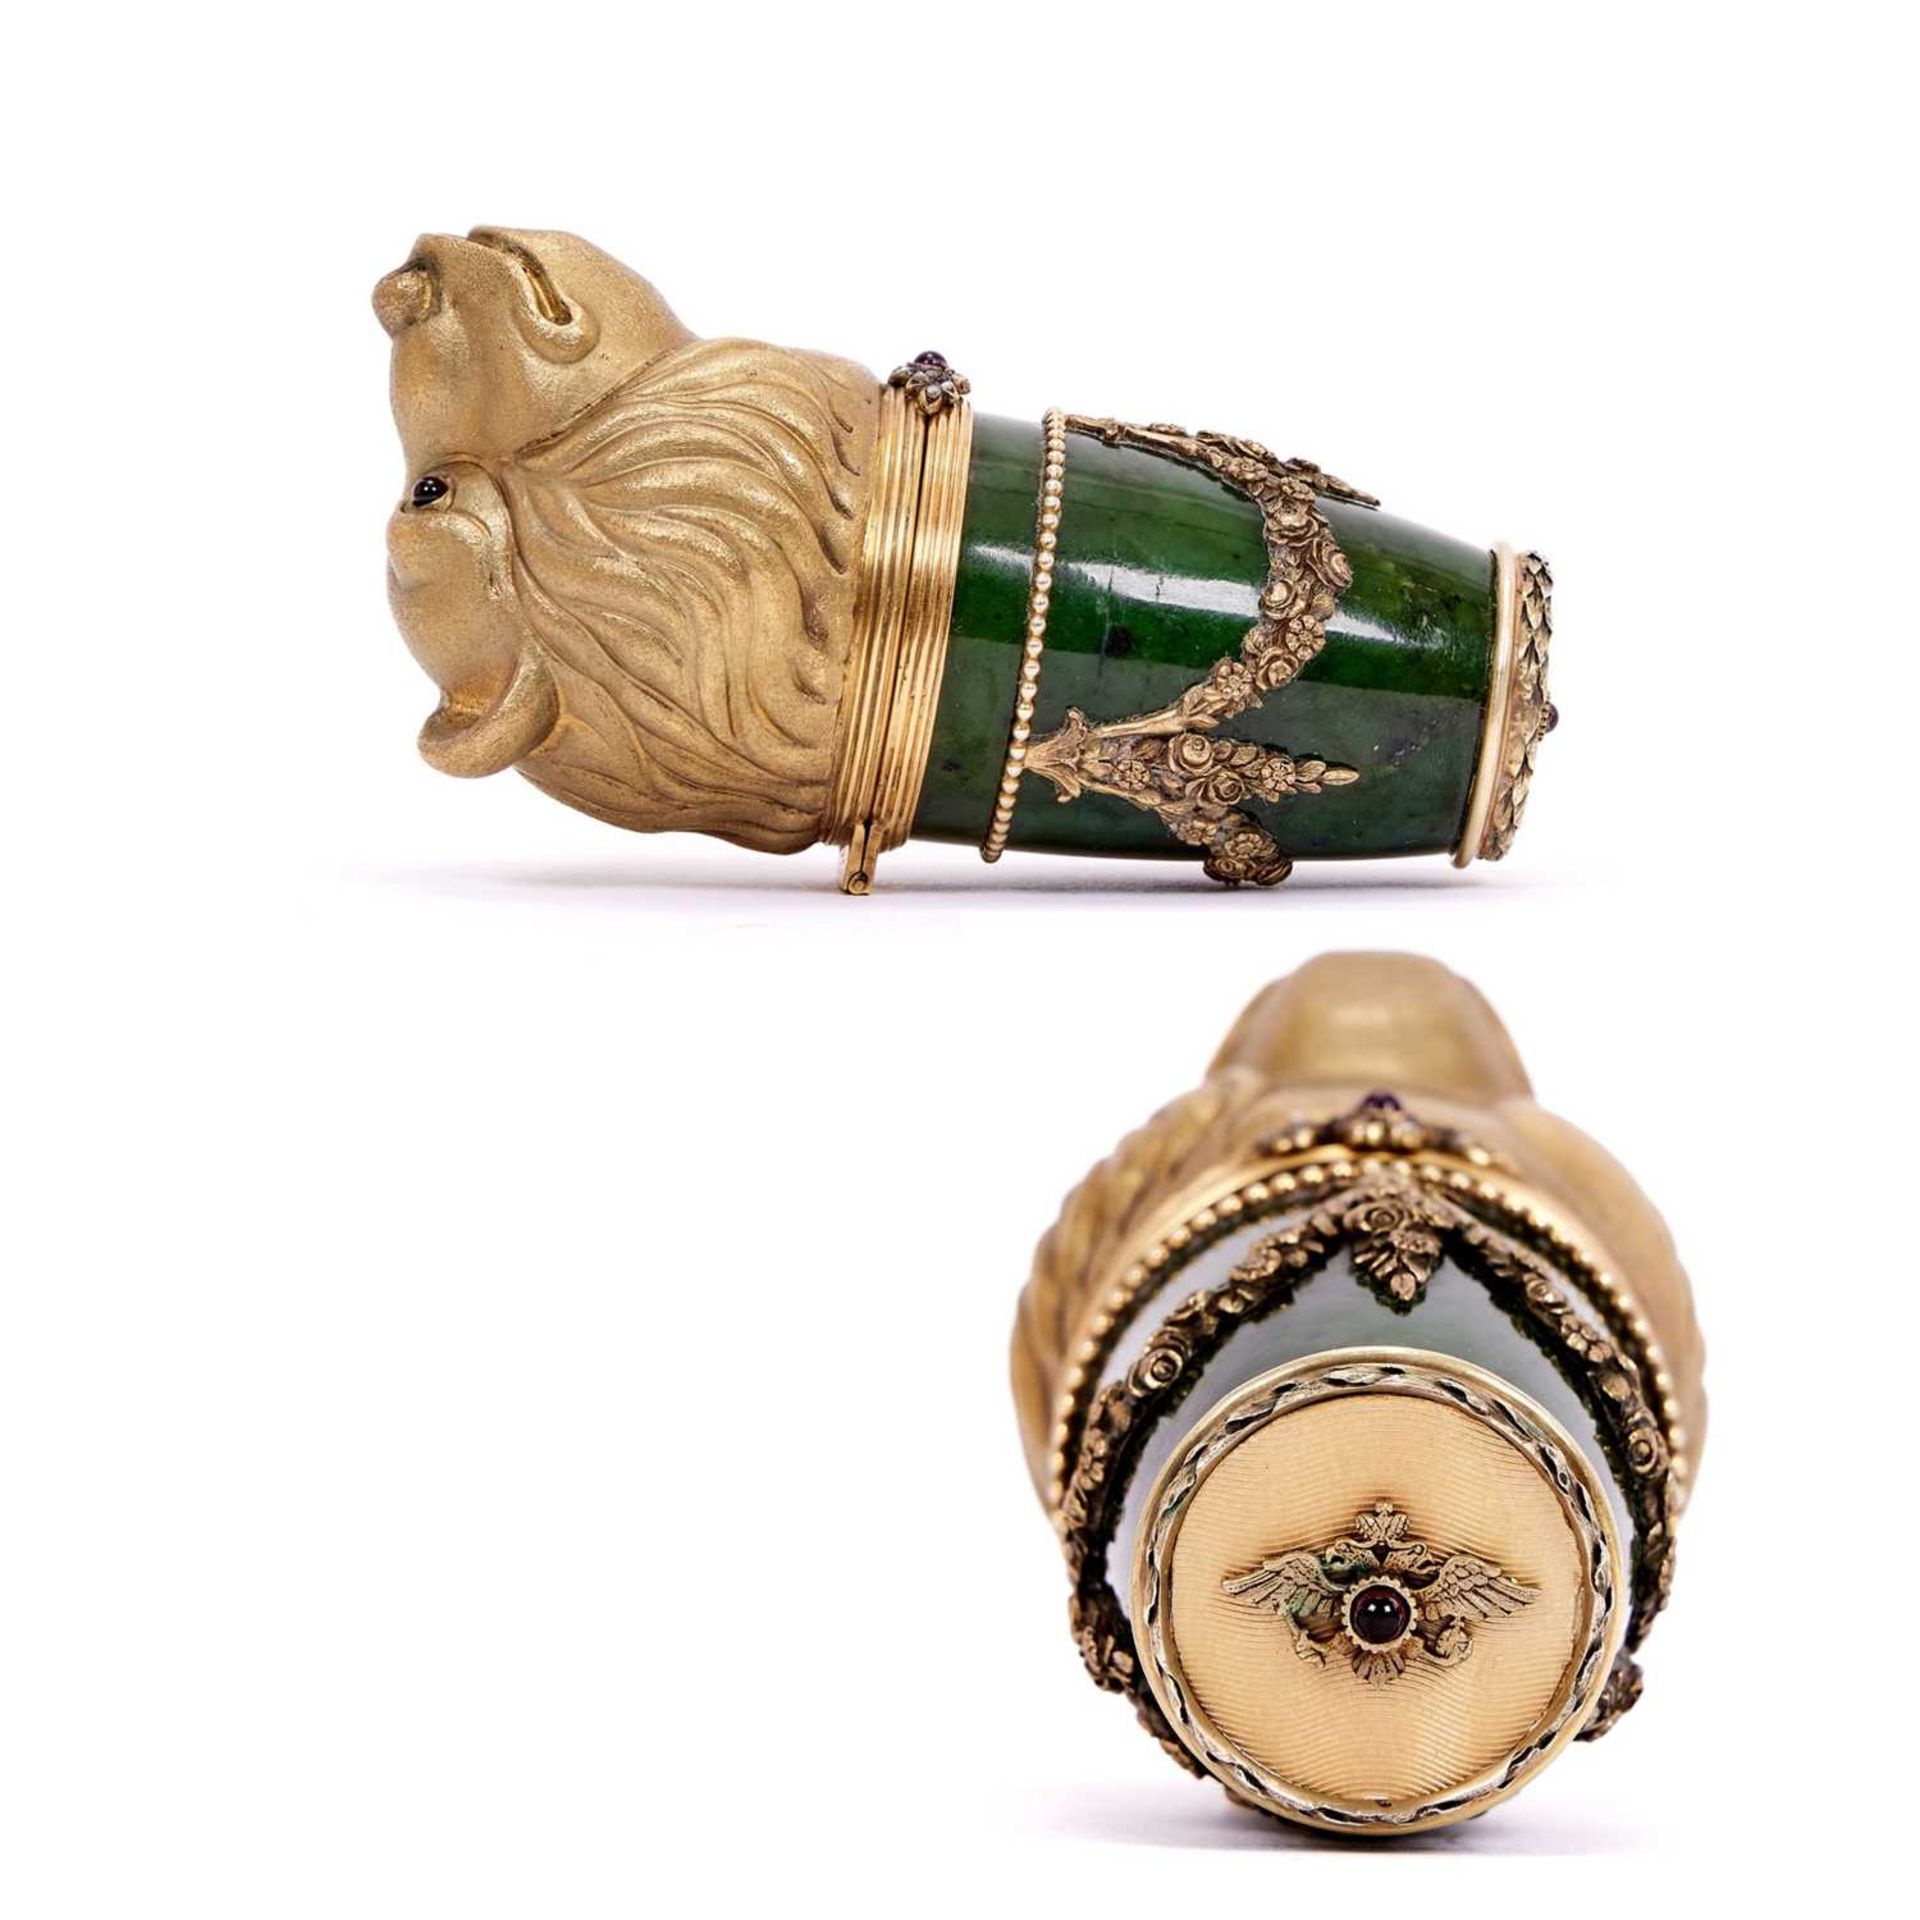 A FABERGE STYLE SILVER GILT, GEM SET AND NEPHRITE JADE BOX MODELLED WITH A BEAR